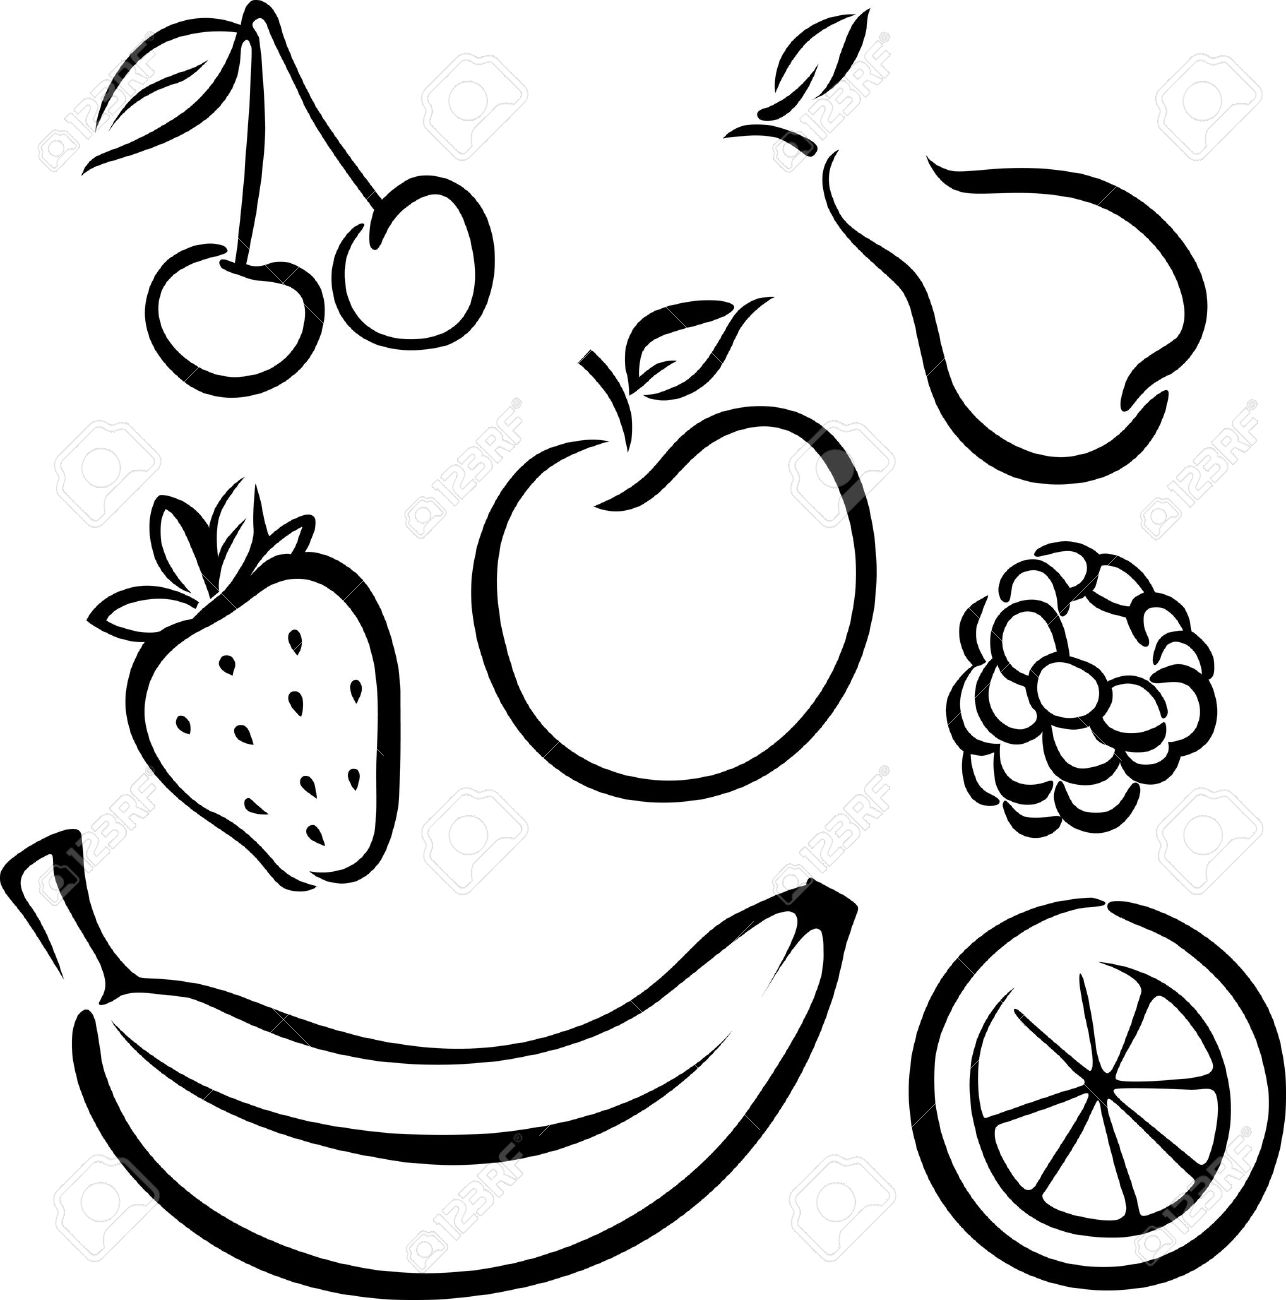 free black and white fruit clipart - photo #31